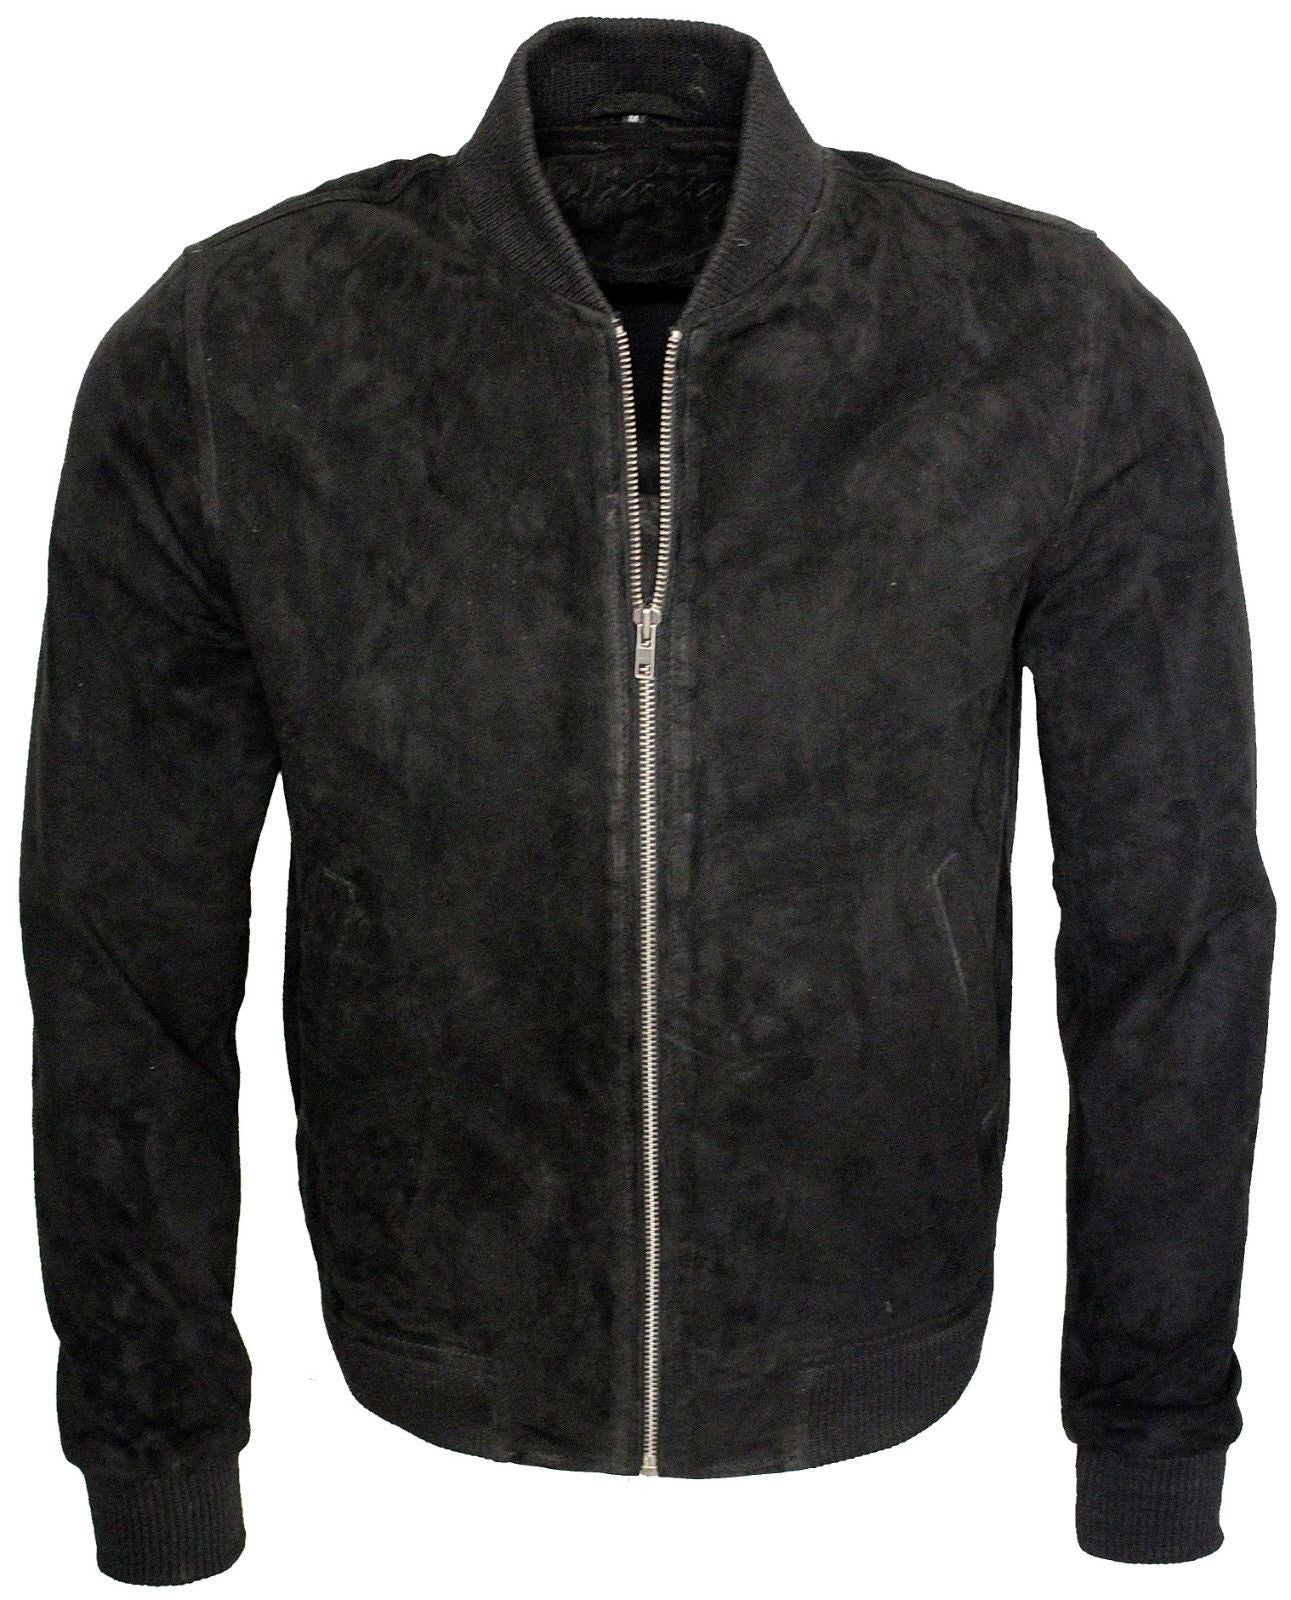 Mens Suede Varsity Leather Bomber Jacket-Castleford - Upperclass Fashions 